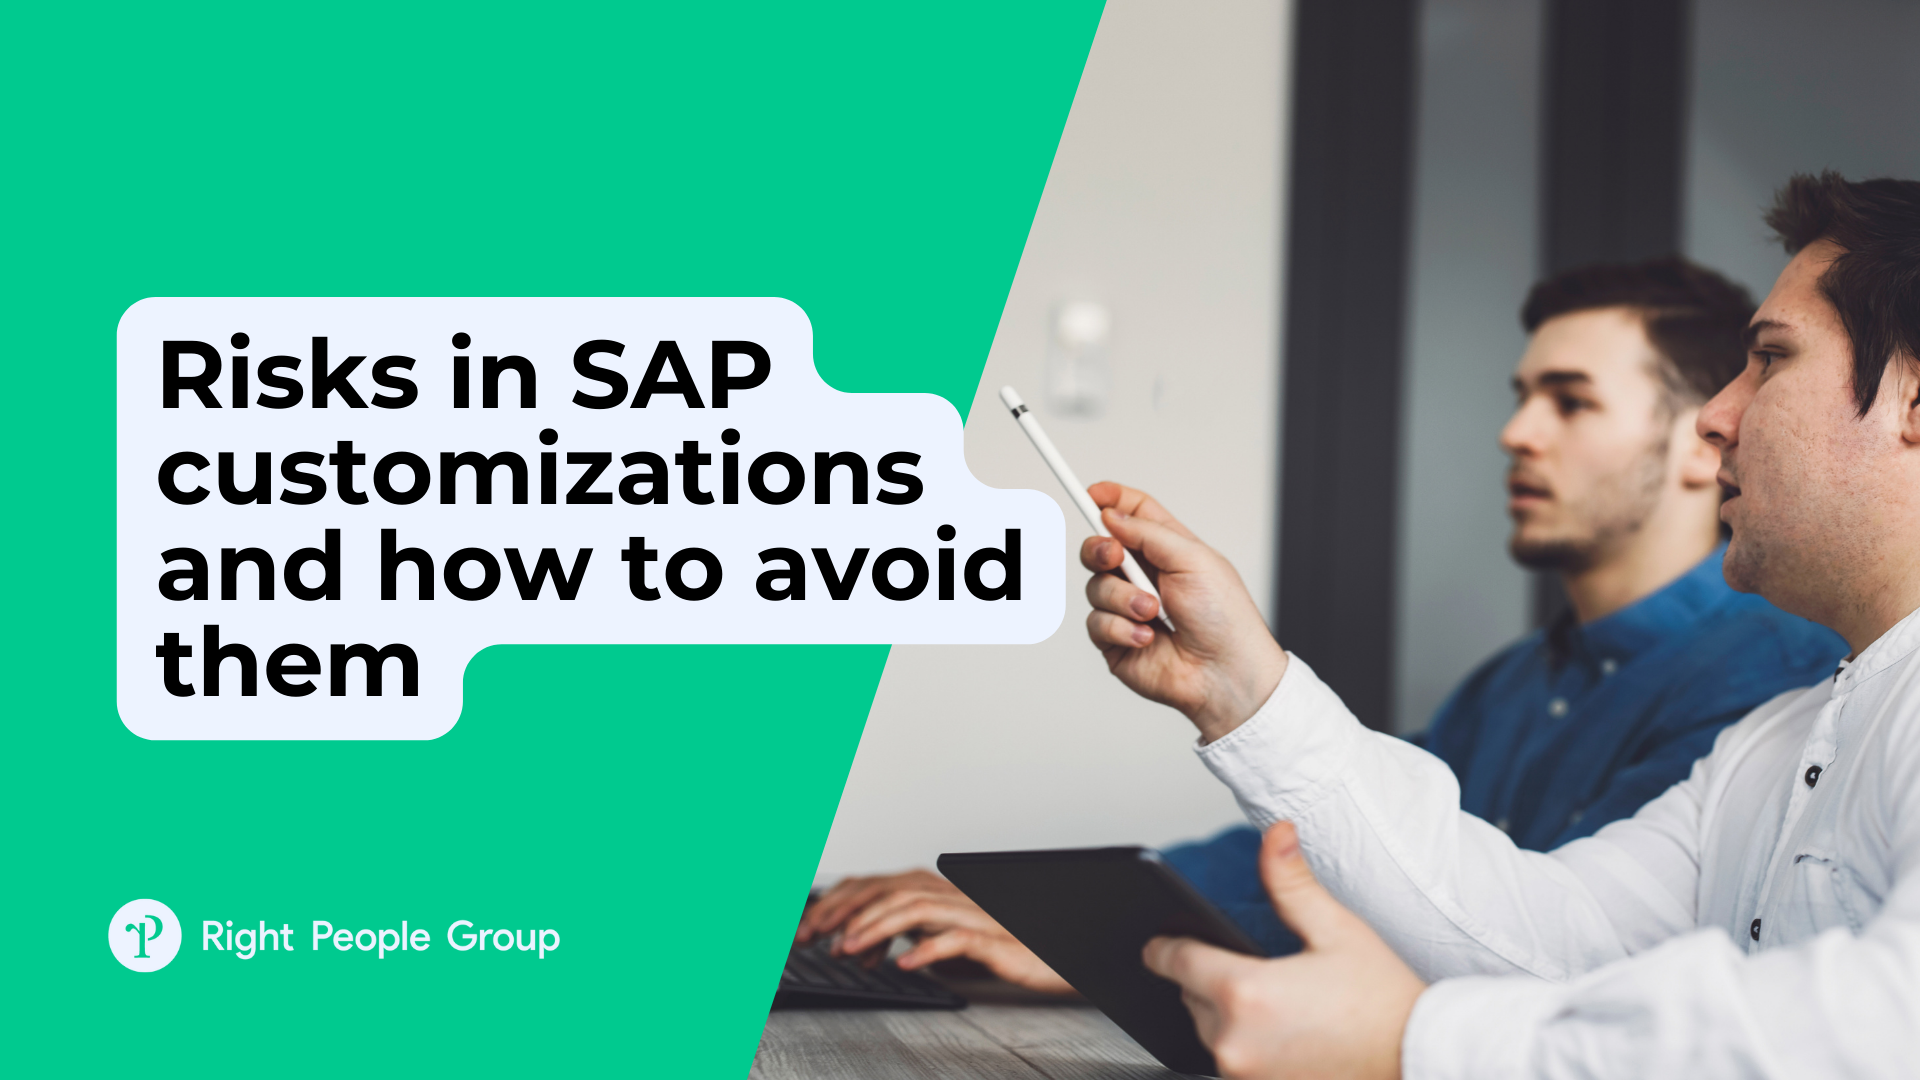 Risks in SAP customizations and how to avoid them